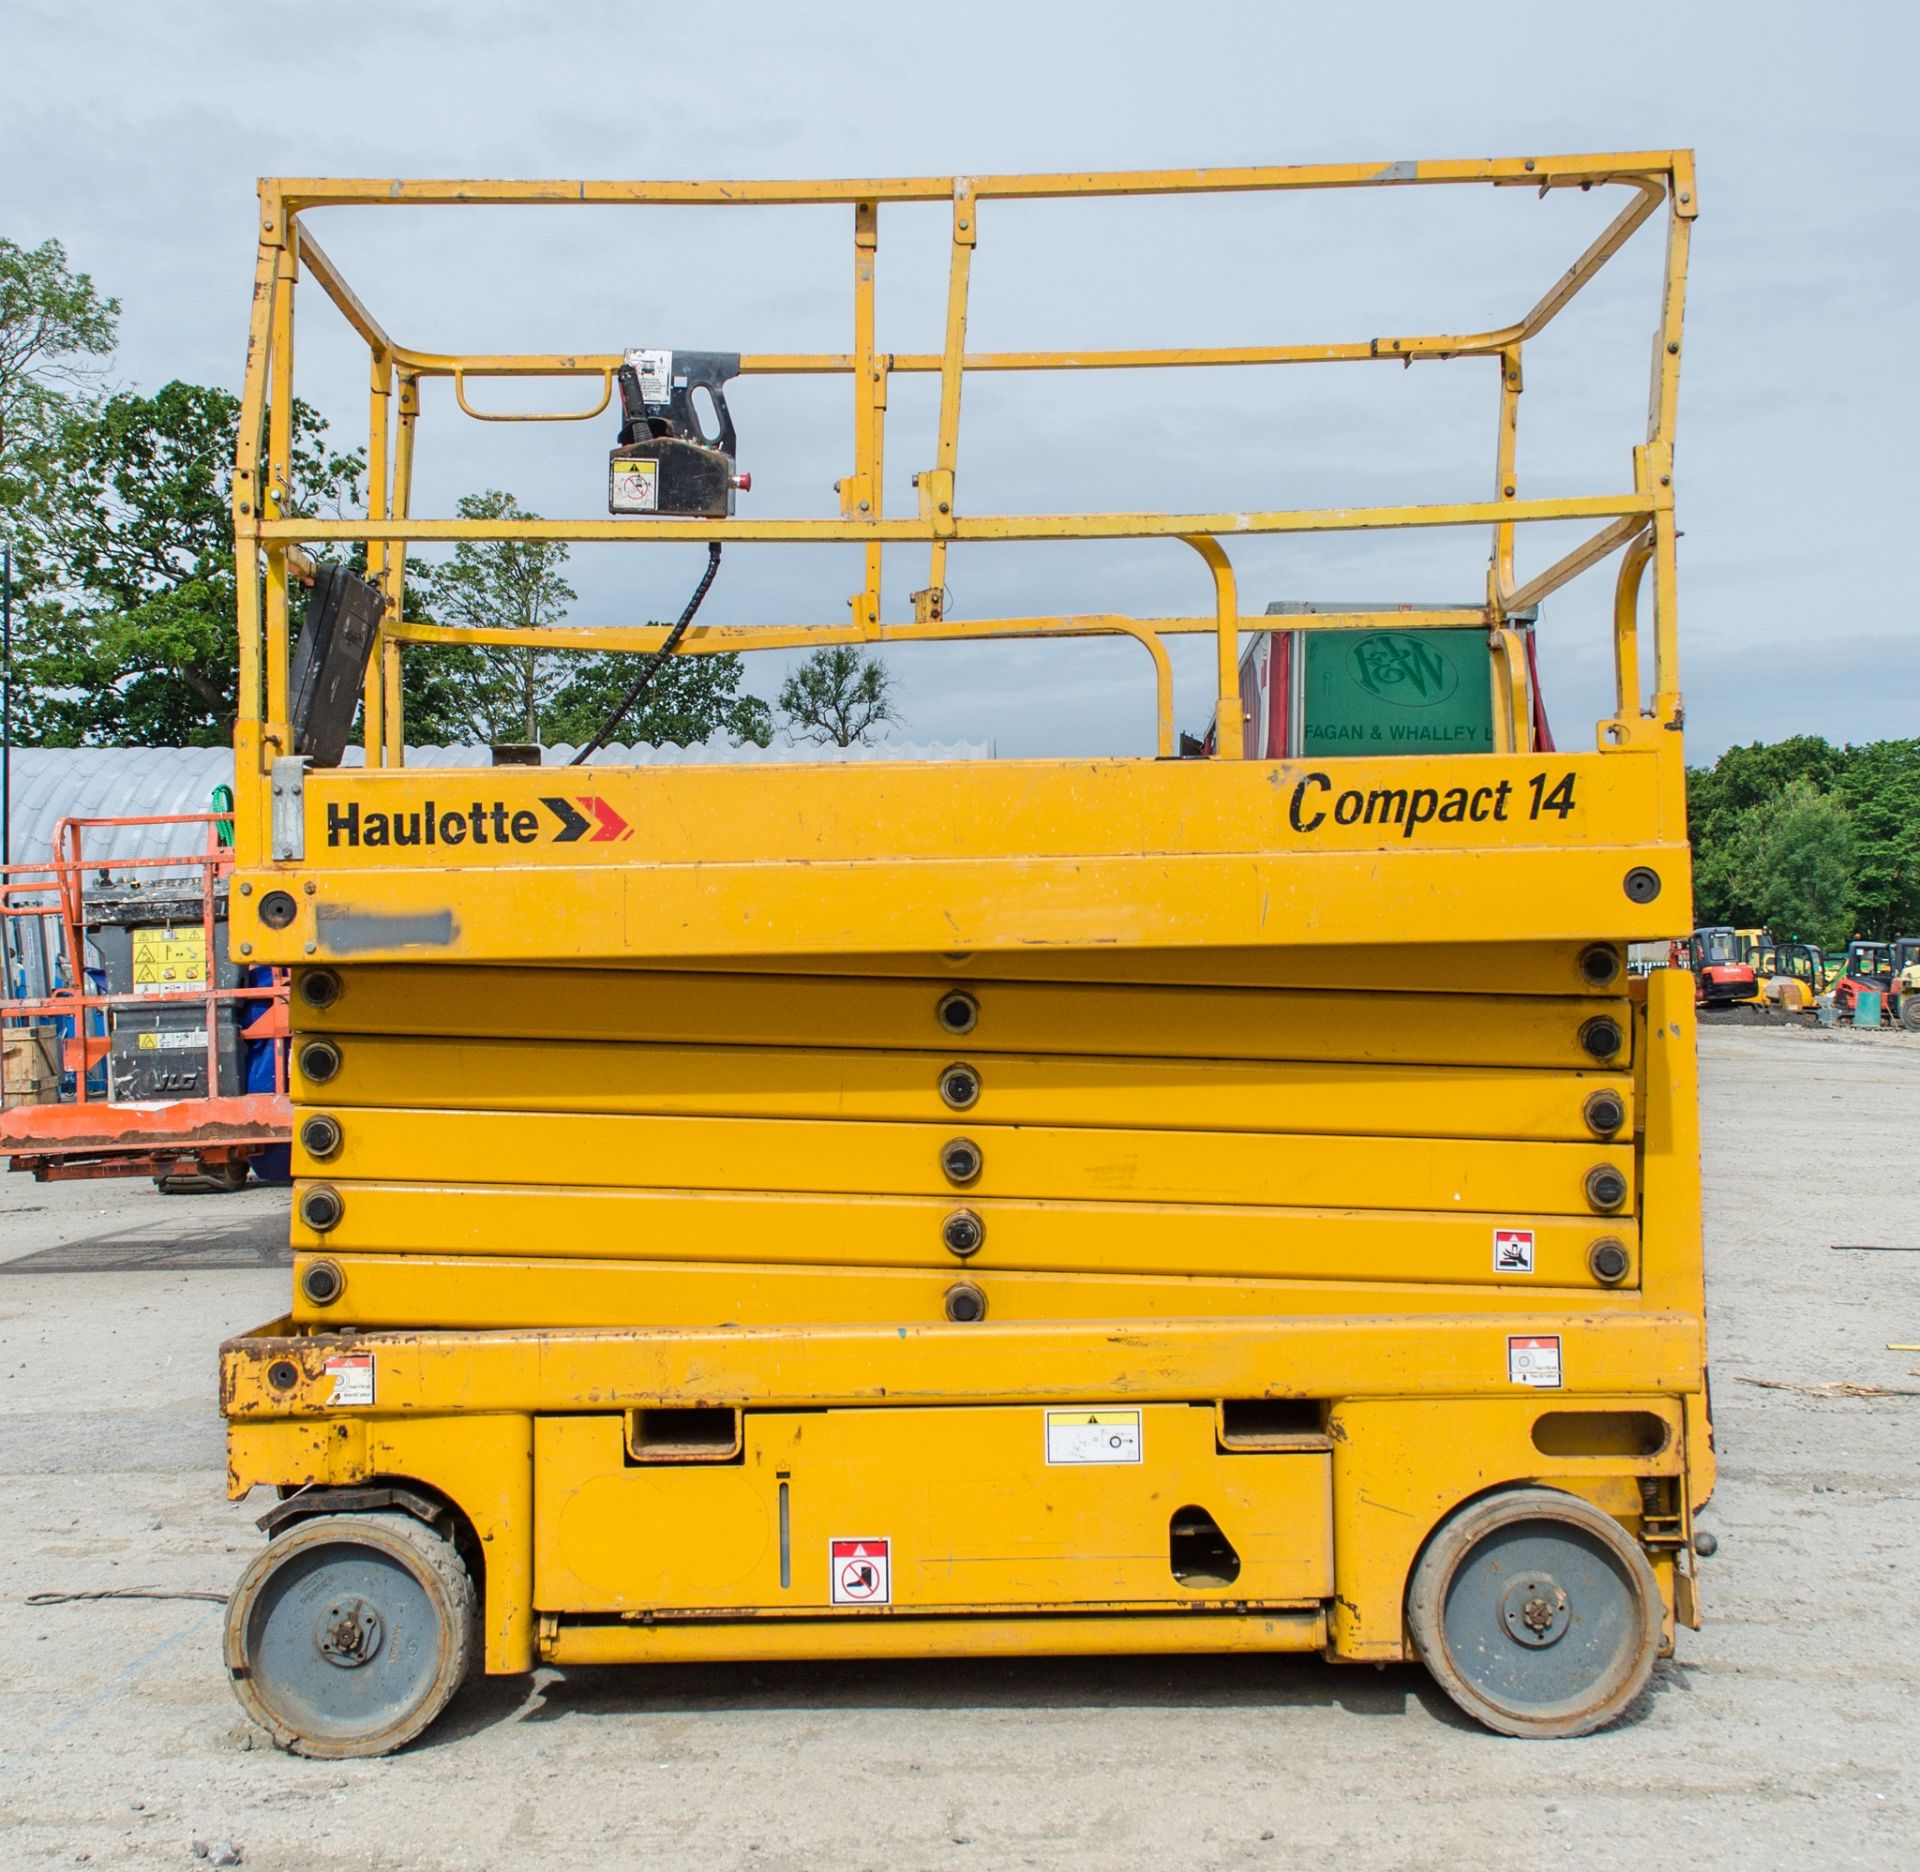 Haulotte Compact 14 battery electric scissor lift Year: 2010 S/N: CE143402 Recorded hours: 481 - Image 6 of 10